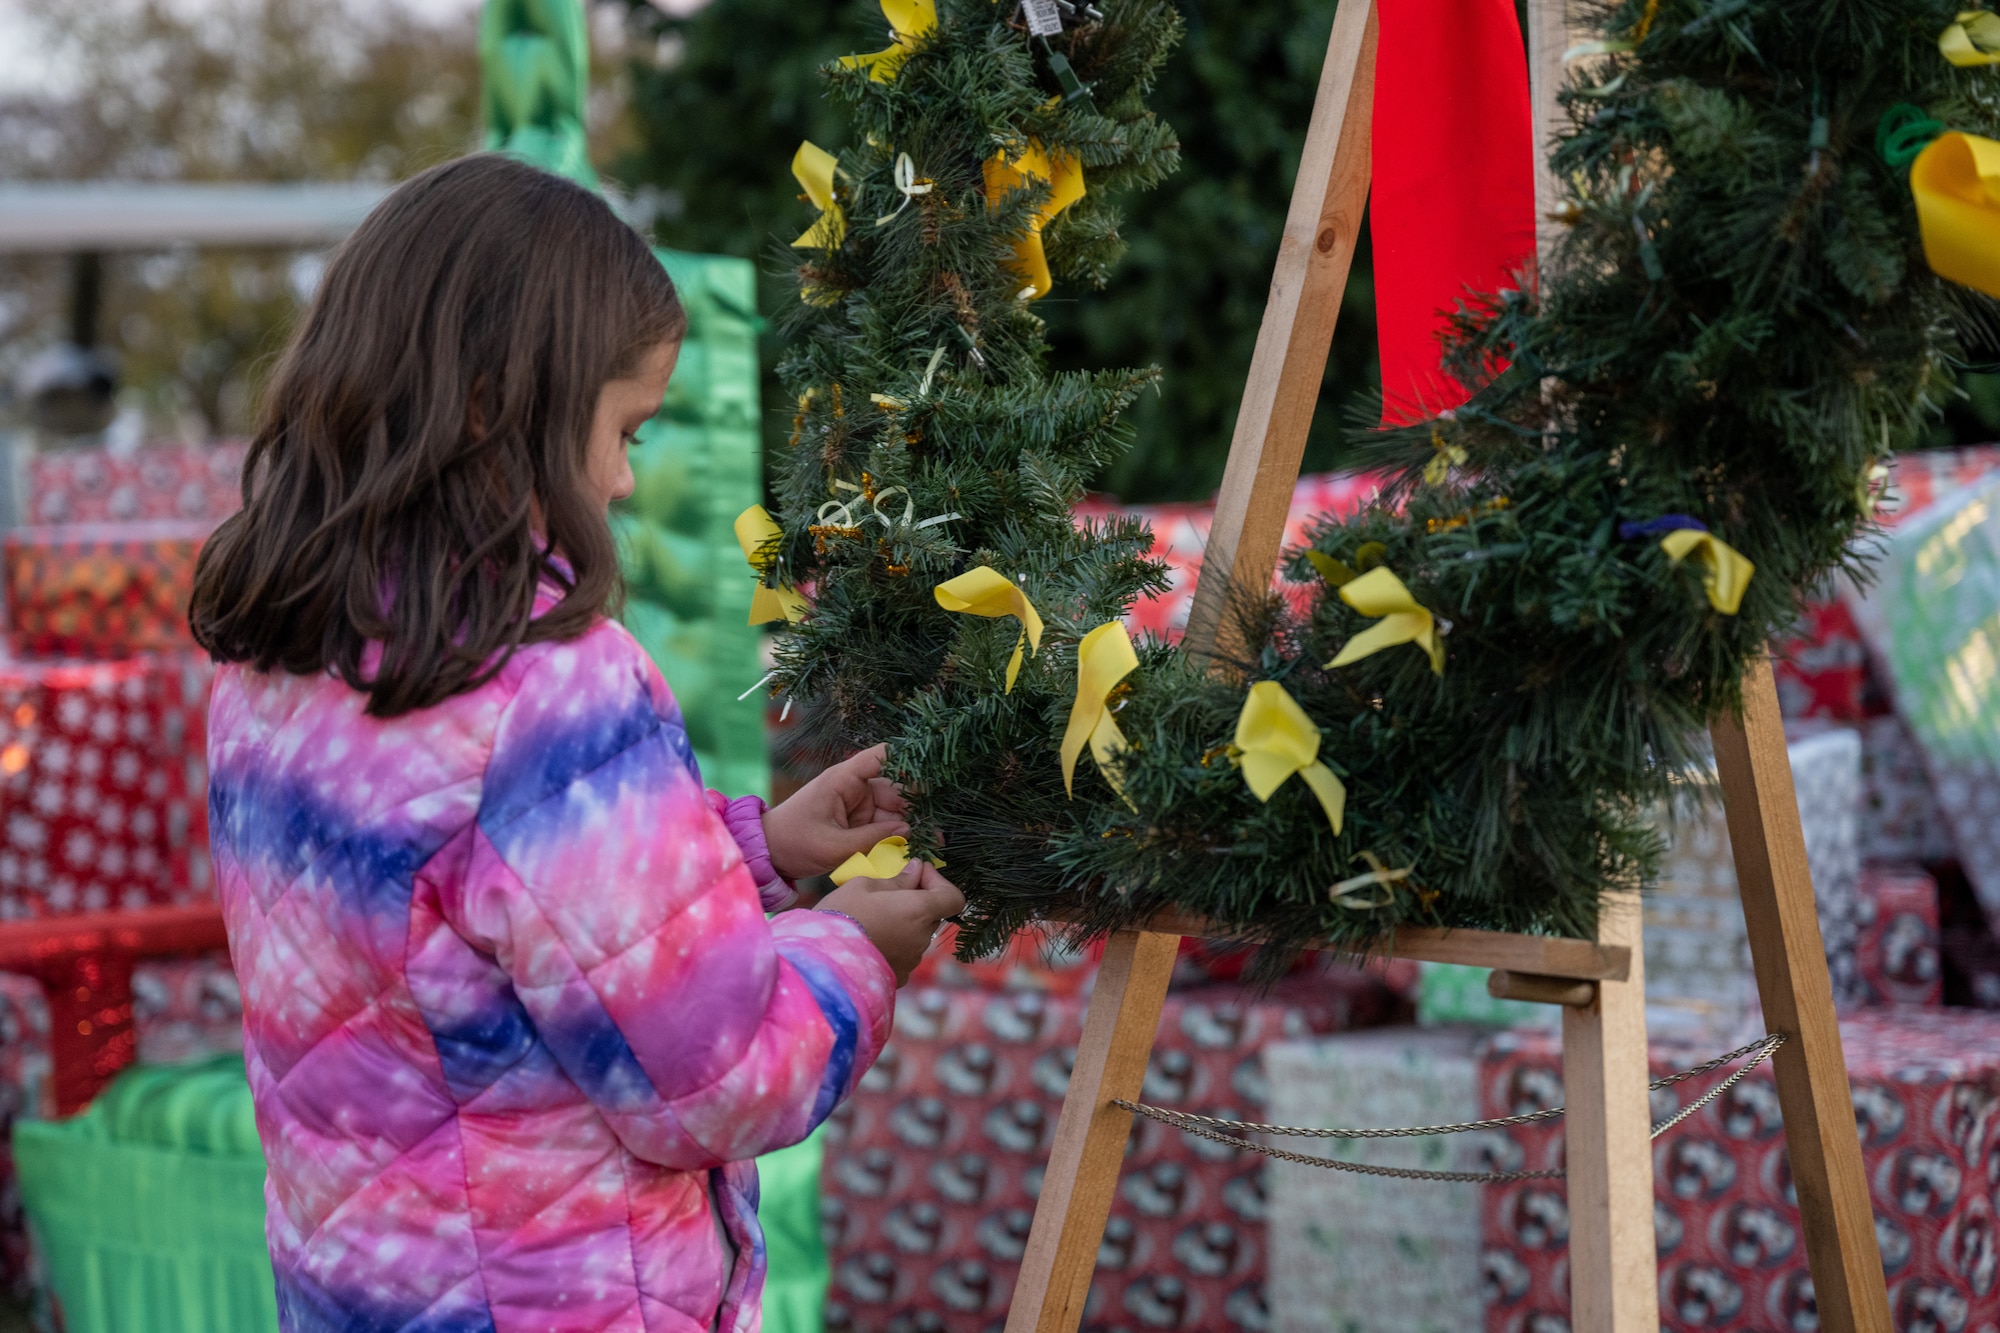 A military child pins a yellow ribbon to a wreath during the Christmas tree lighting ceremony at Hurlburt Field, Florida, Dec. 7, 2023. Children whose family members are currently deployed attached yellow ribbons to a wreath as a tribute to those who were unable to join during the holiday season. (U.S. Air Force photo by the Senior Airman Alysa Calvarese)